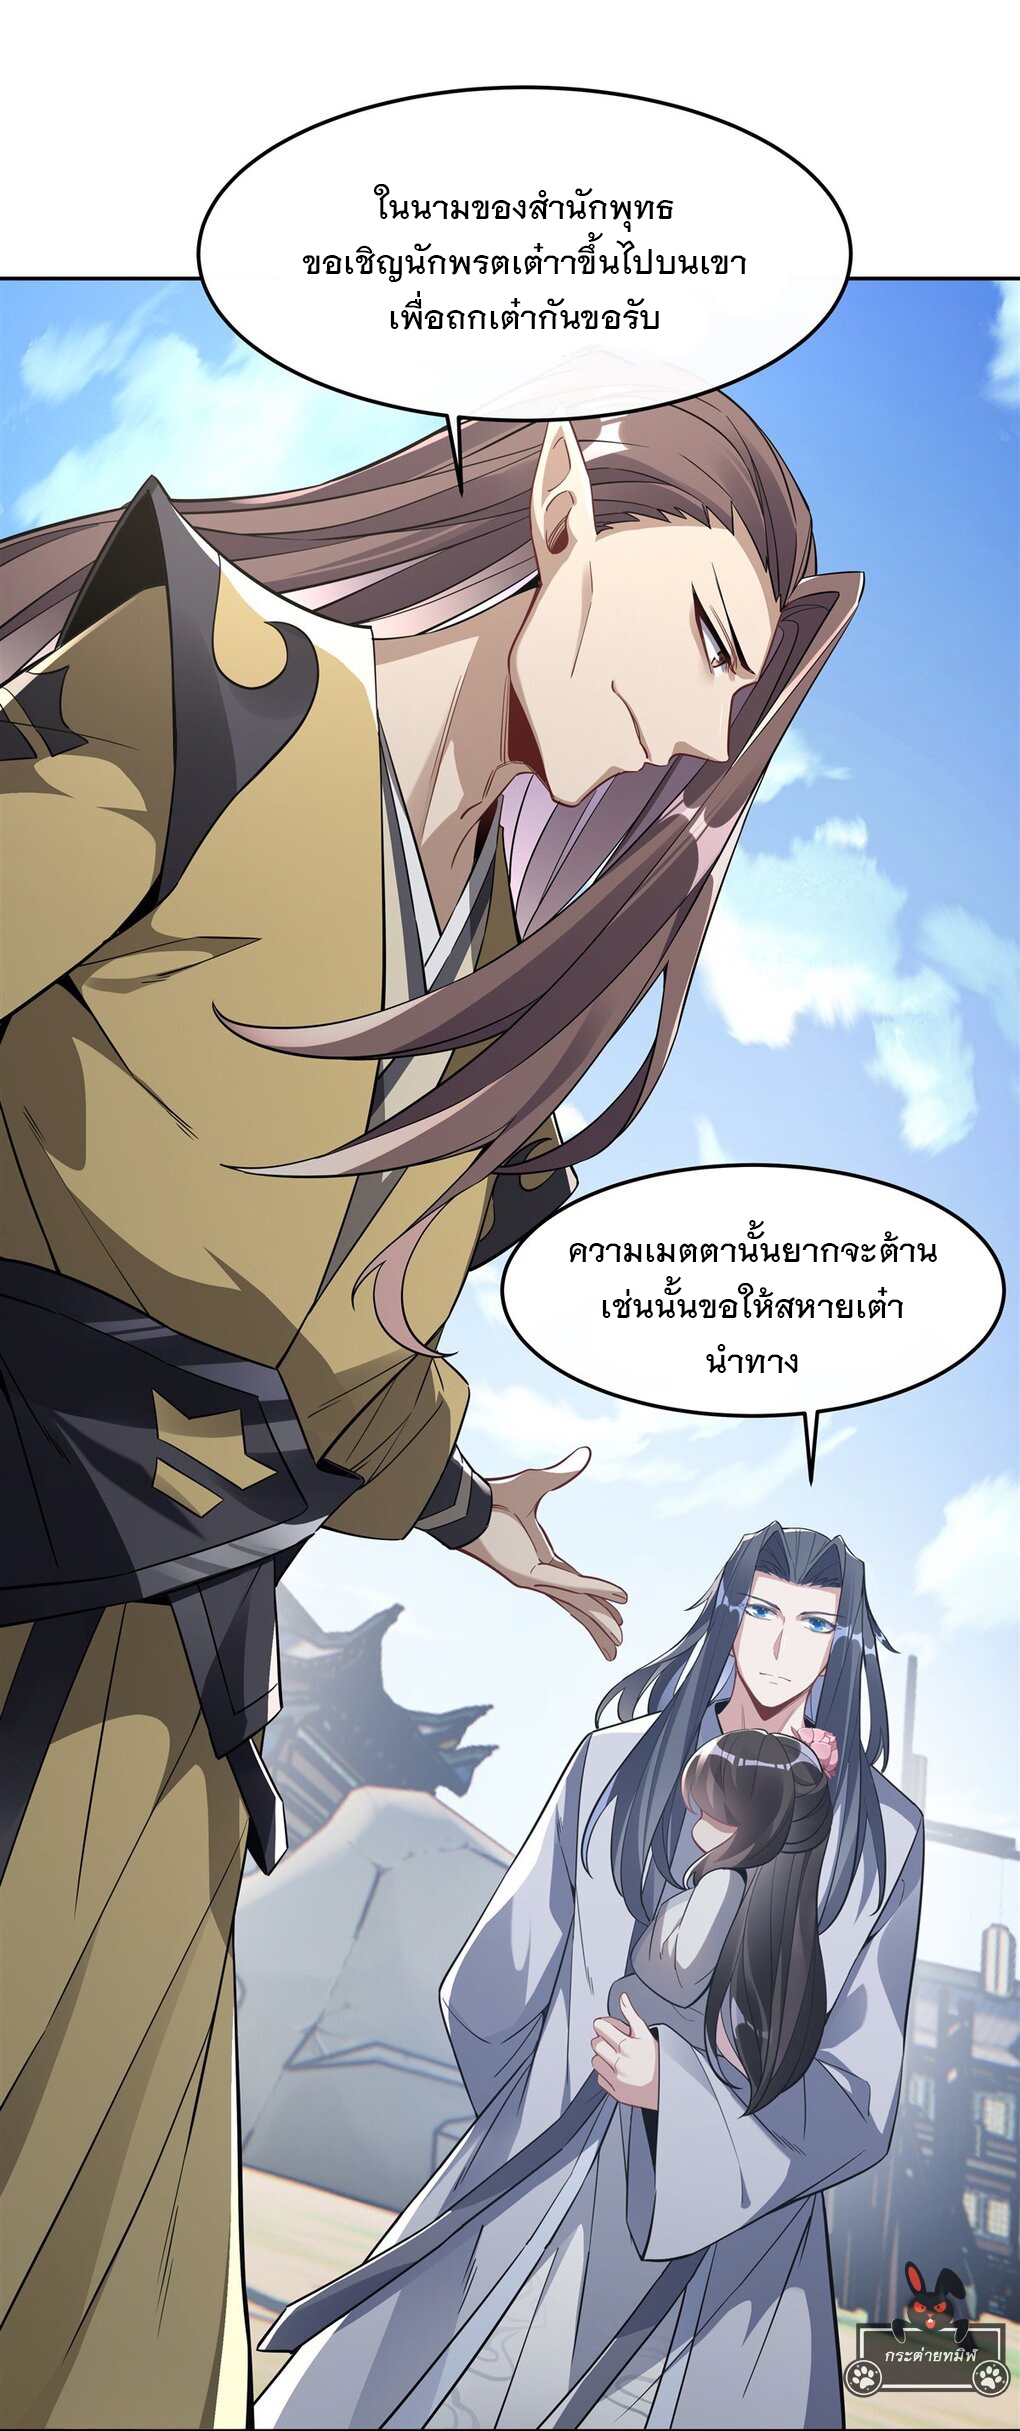 My Female Apprentices Are All Big Shots From the Future Ã Â¸â€¢Ã Â¸Â­Ã Â¸â„¢Ã Â¸â€”Ã Â¸ÂµÃ Â¹Ë† 96 (7)